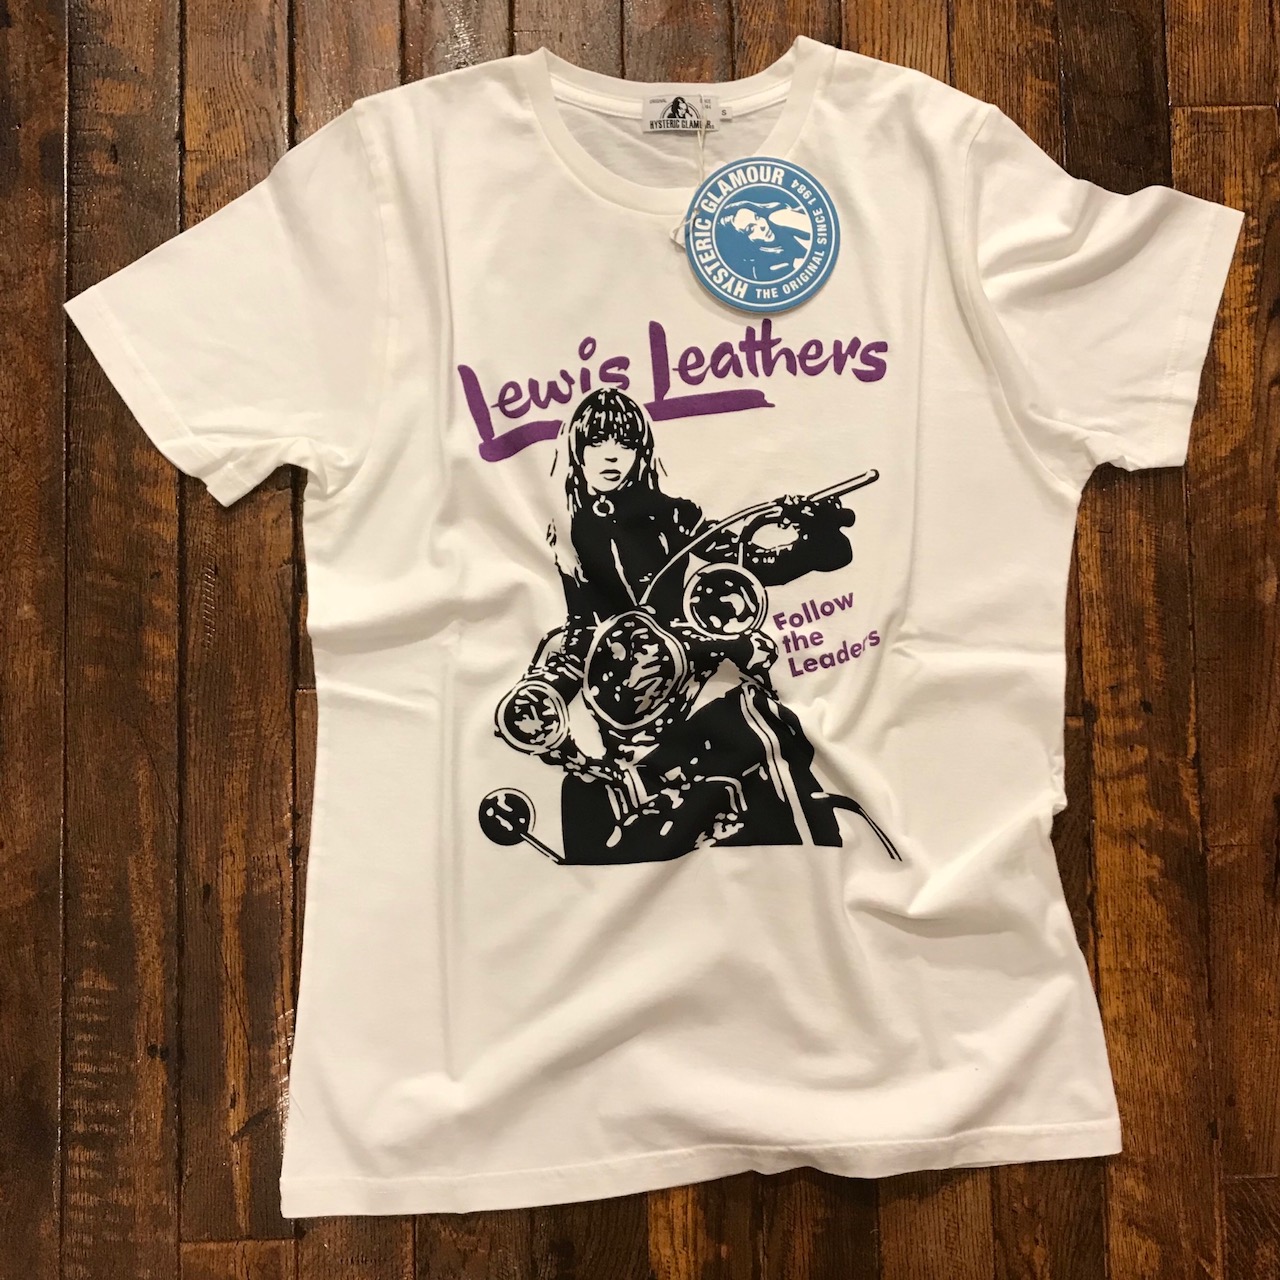 【Hysteric Glamour x Lewis Leathers】Biker Girl T-shirt - Lewis 